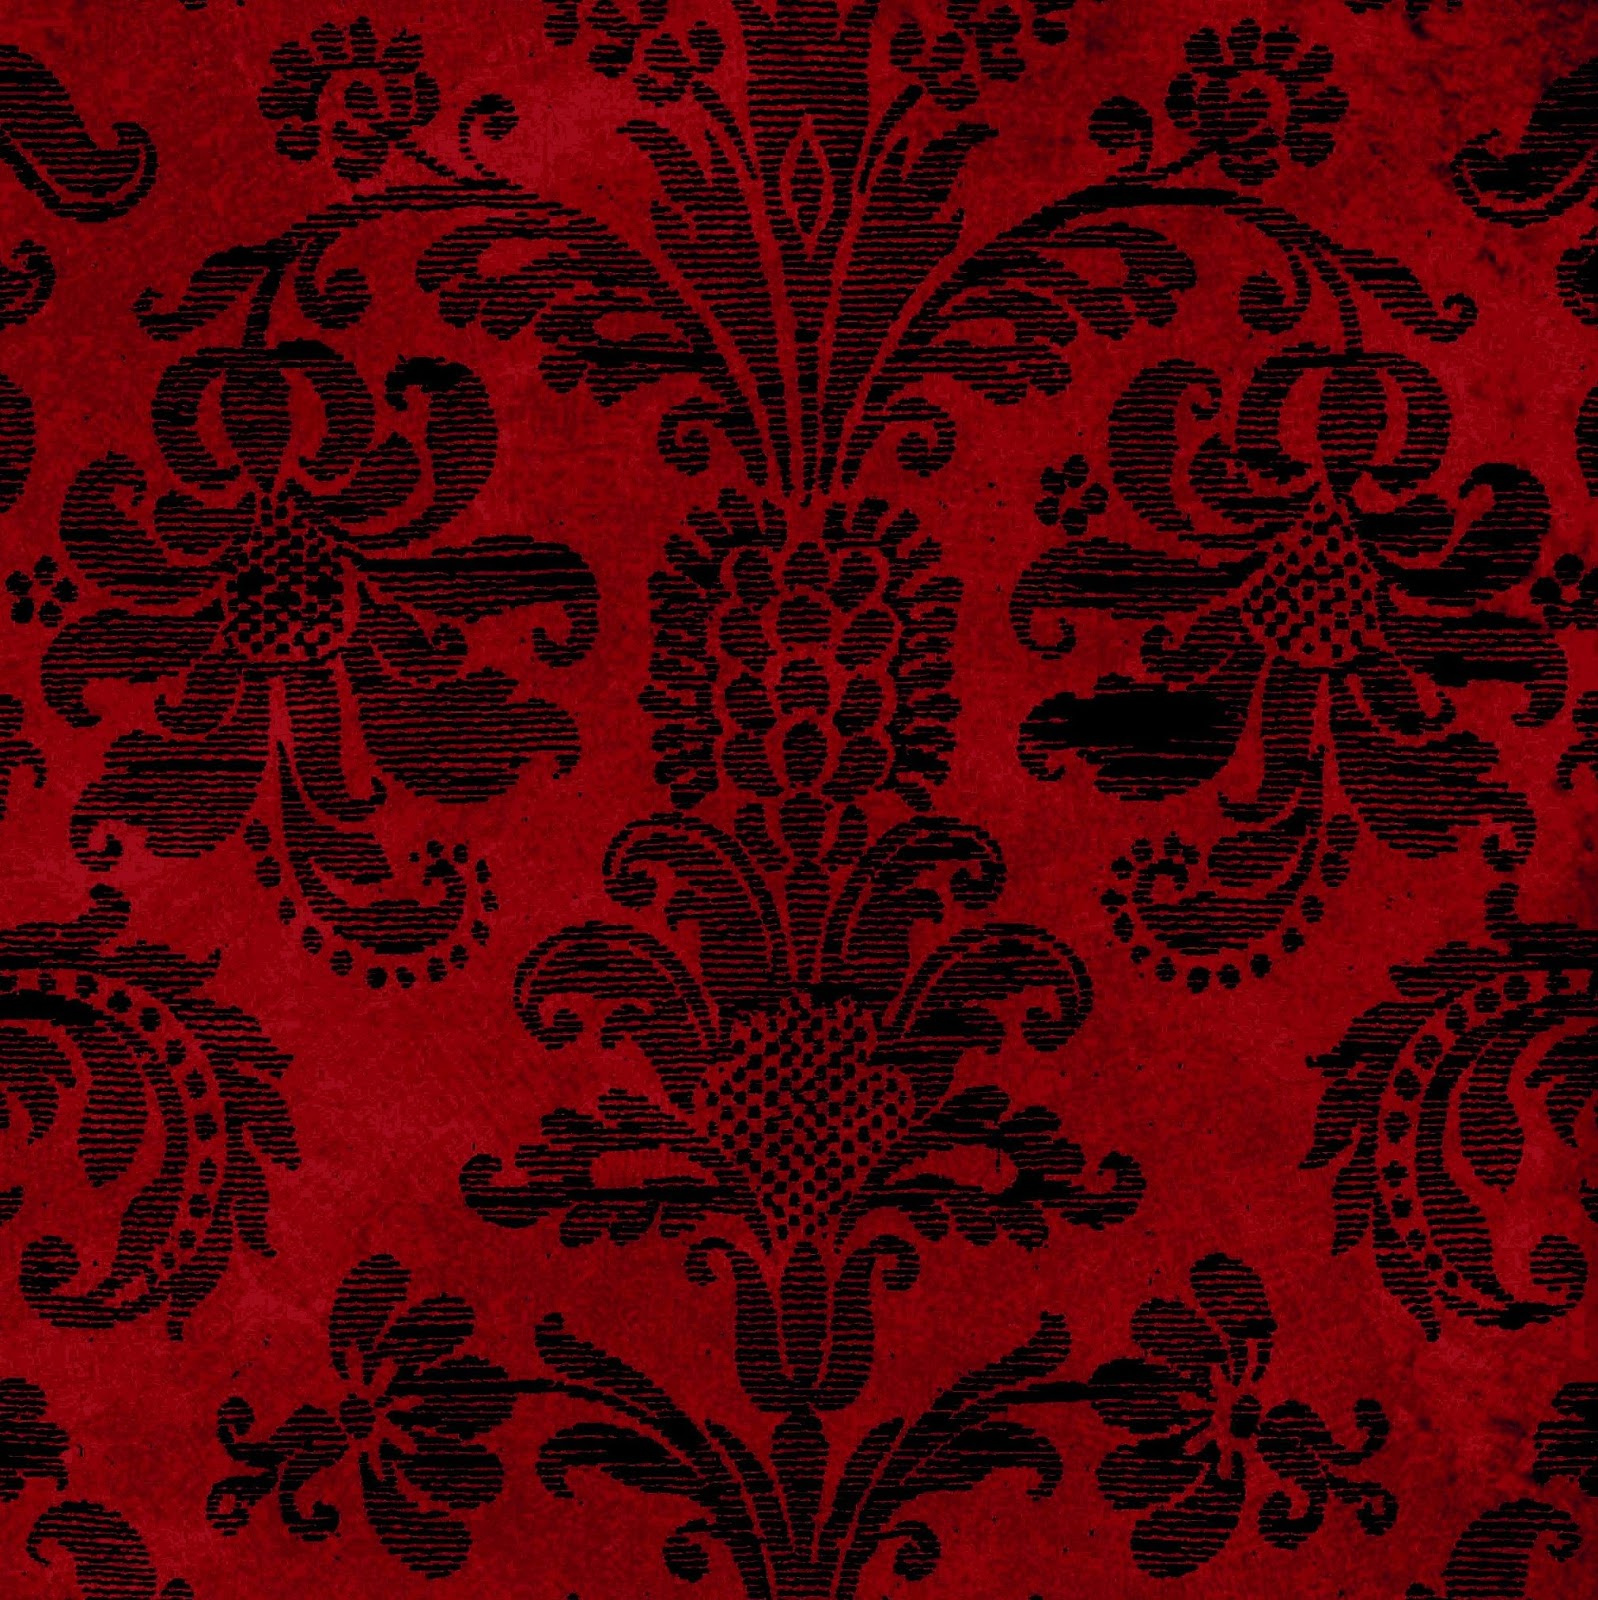 Red And White Patterned Wallpaper - Red And Black Lace Background -  1598x1600 Wallpaper 